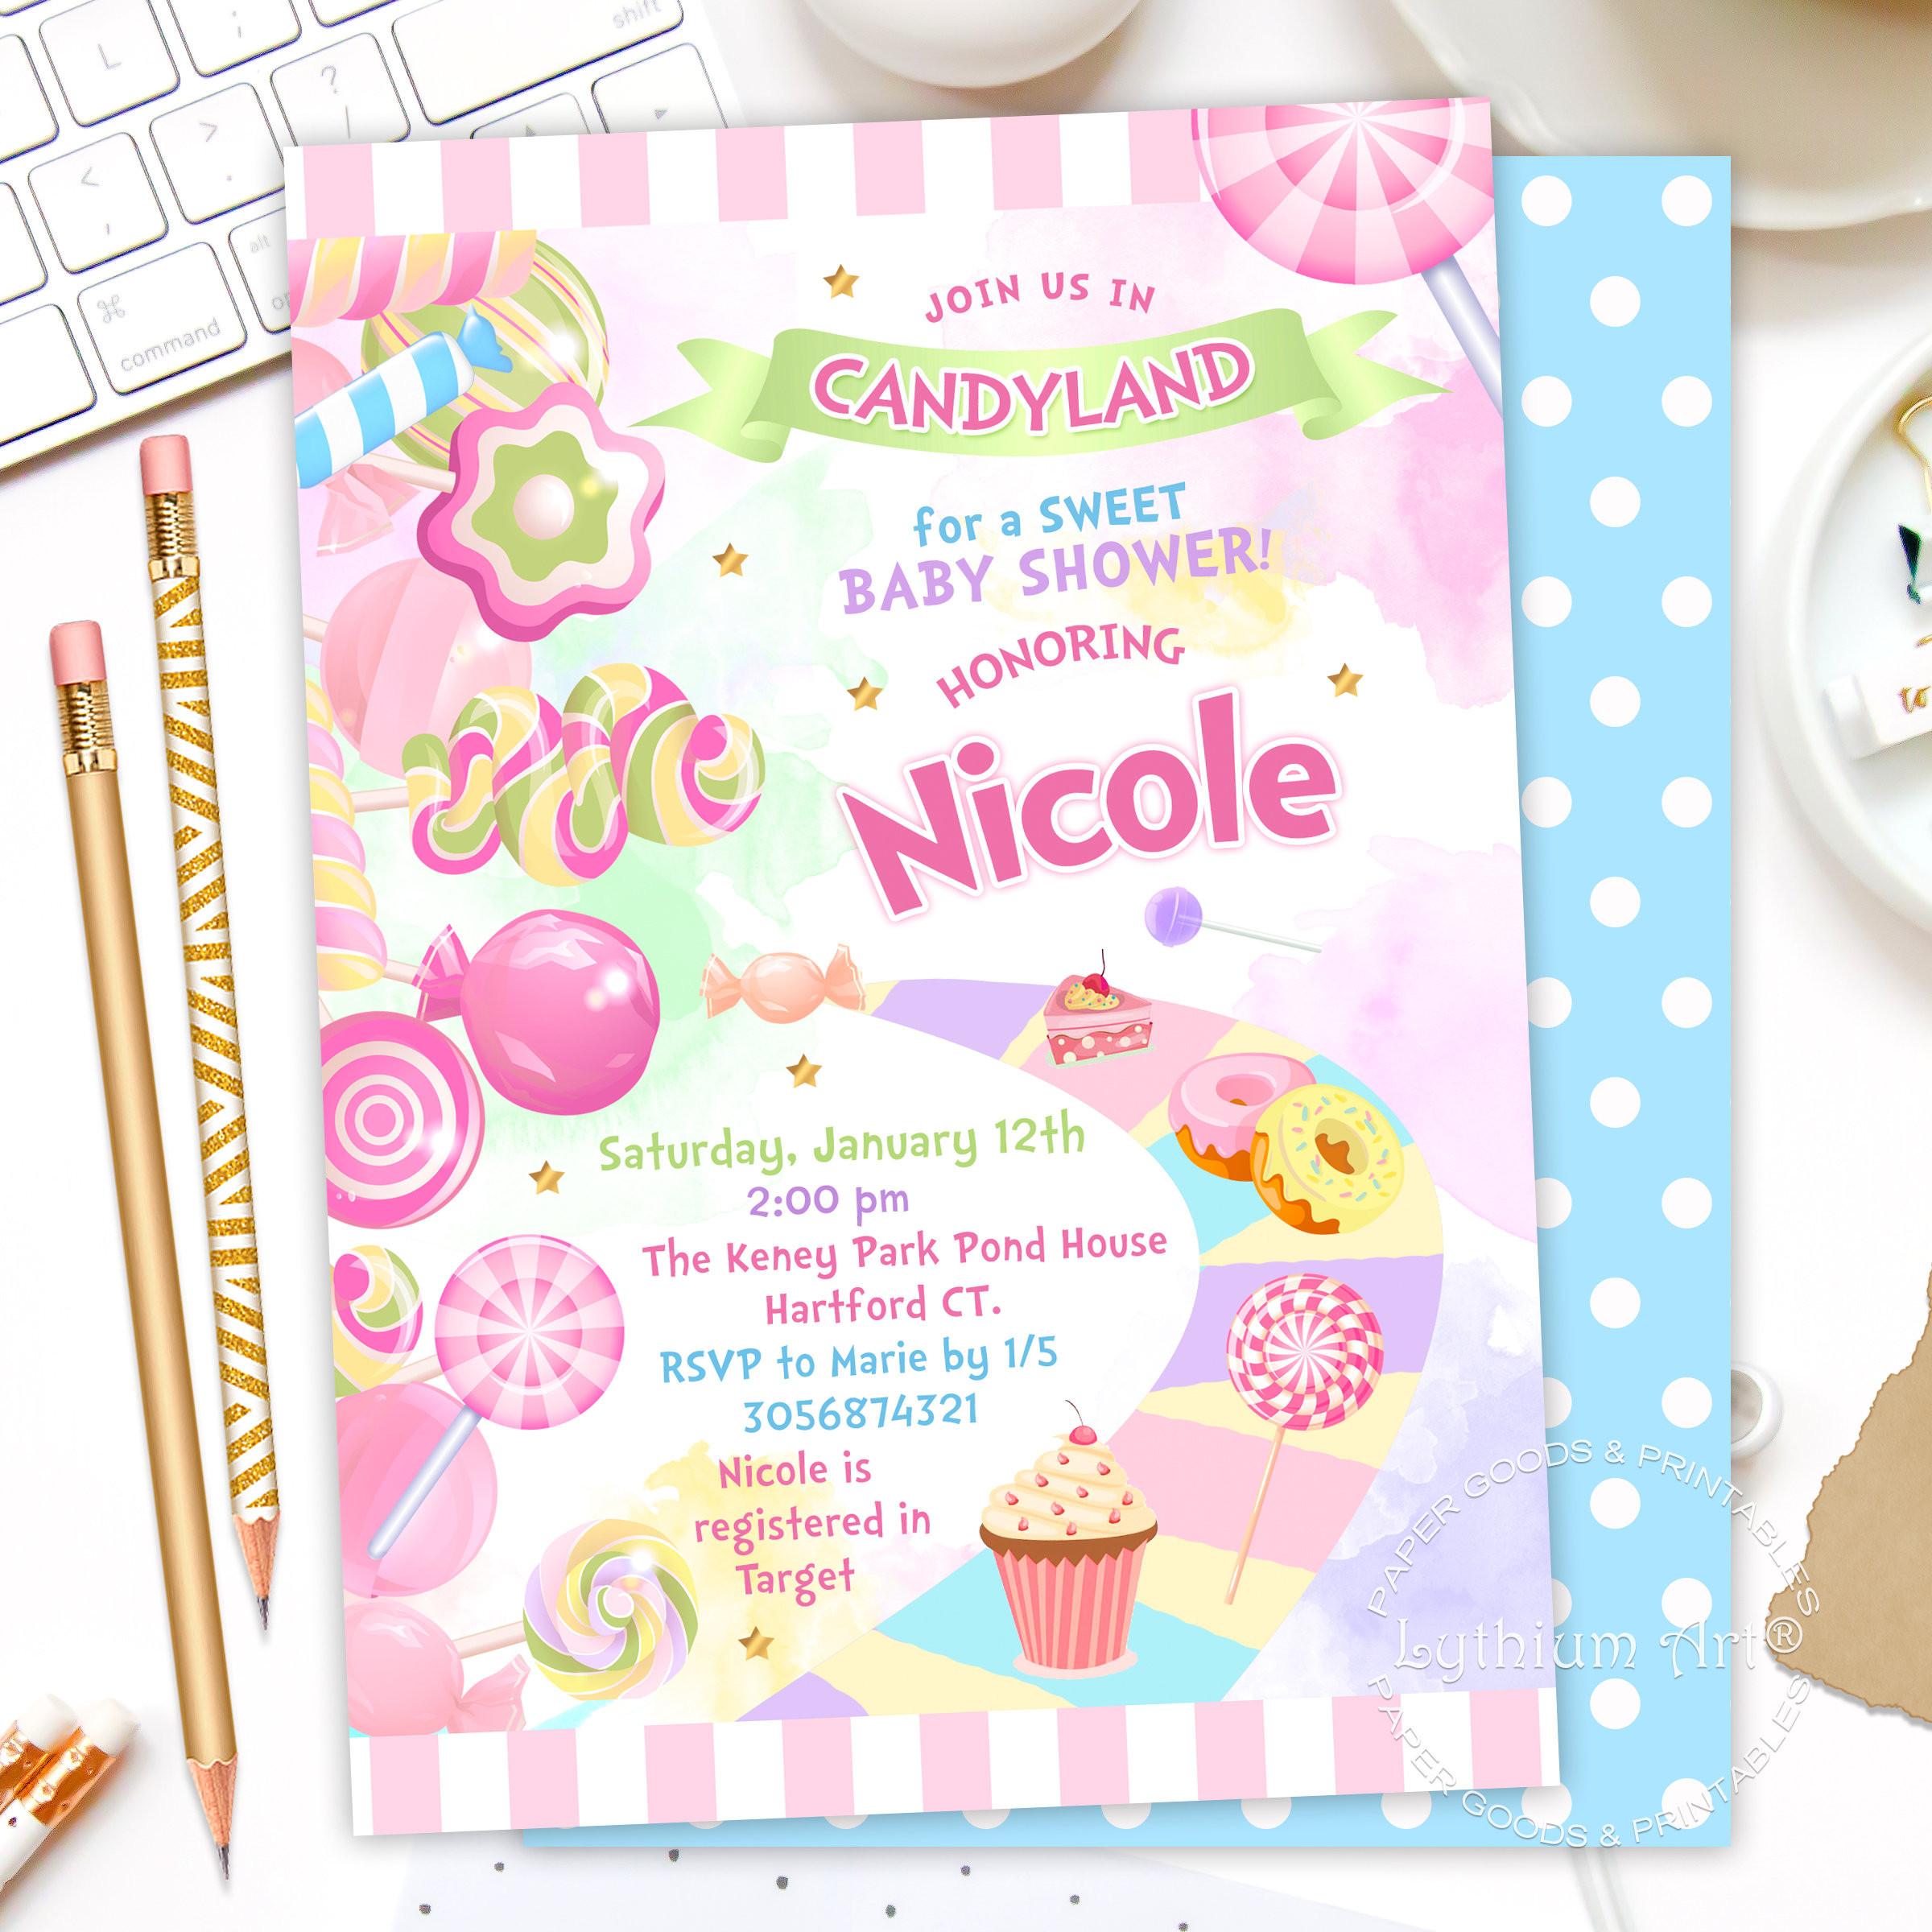 Candyland Birthday Party Invitations
 CANDYLAND Baby Shower Invitation Candy Land Party